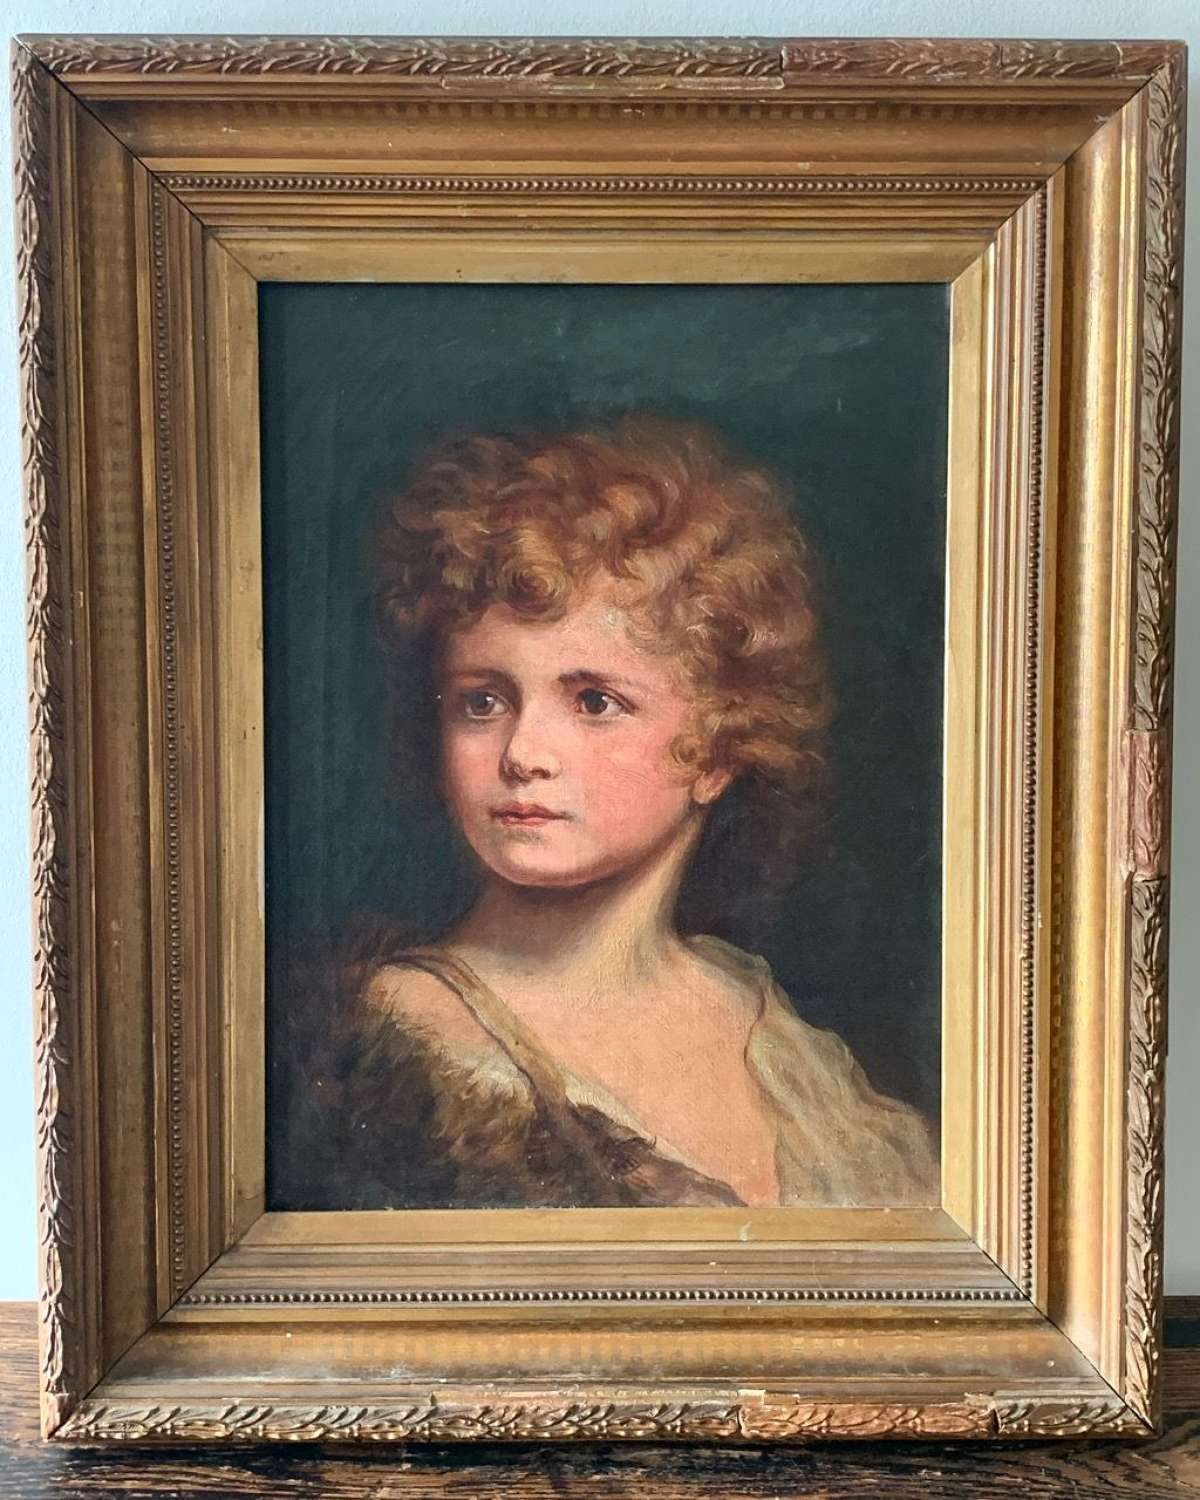 19TH CENTURY PORTRAIT PAINTING OF A YOUNG BOY